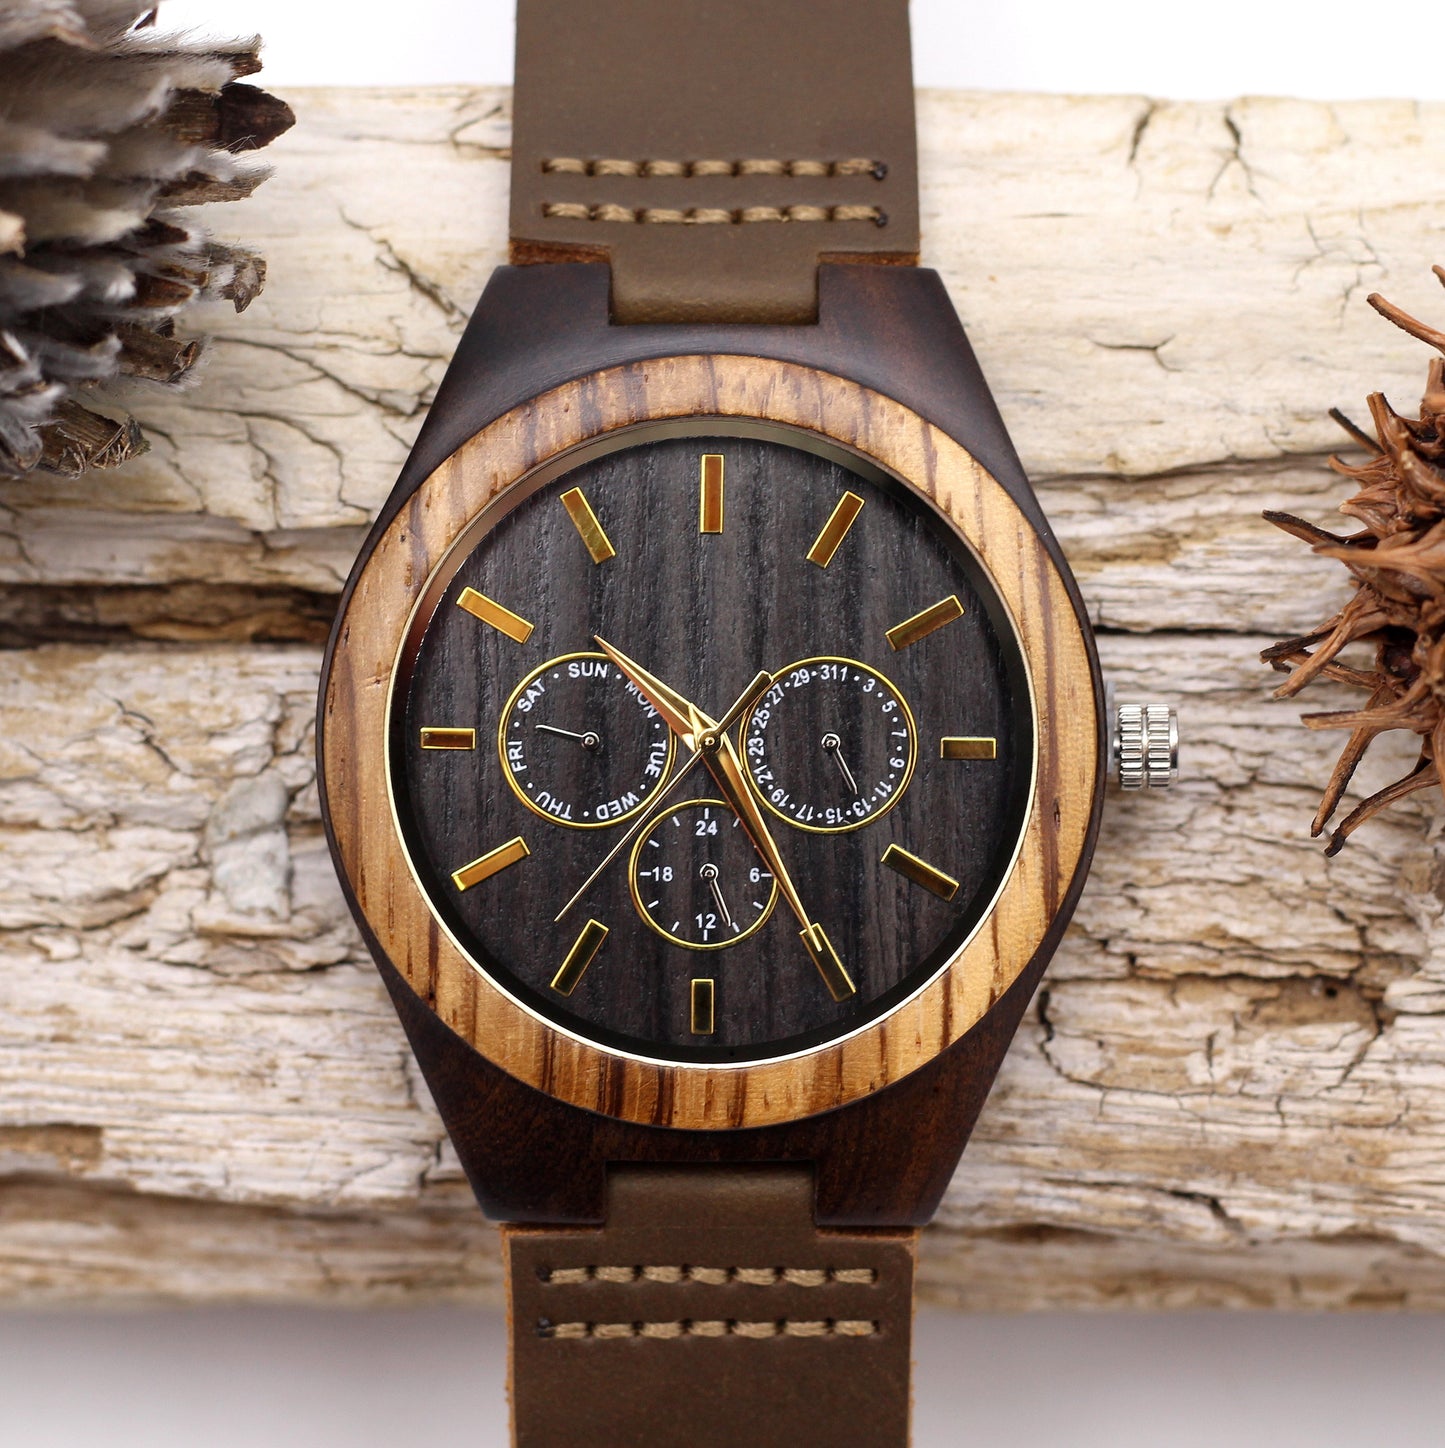 MANLY JONES Men's Ebony Wood Watch with Leather Strap